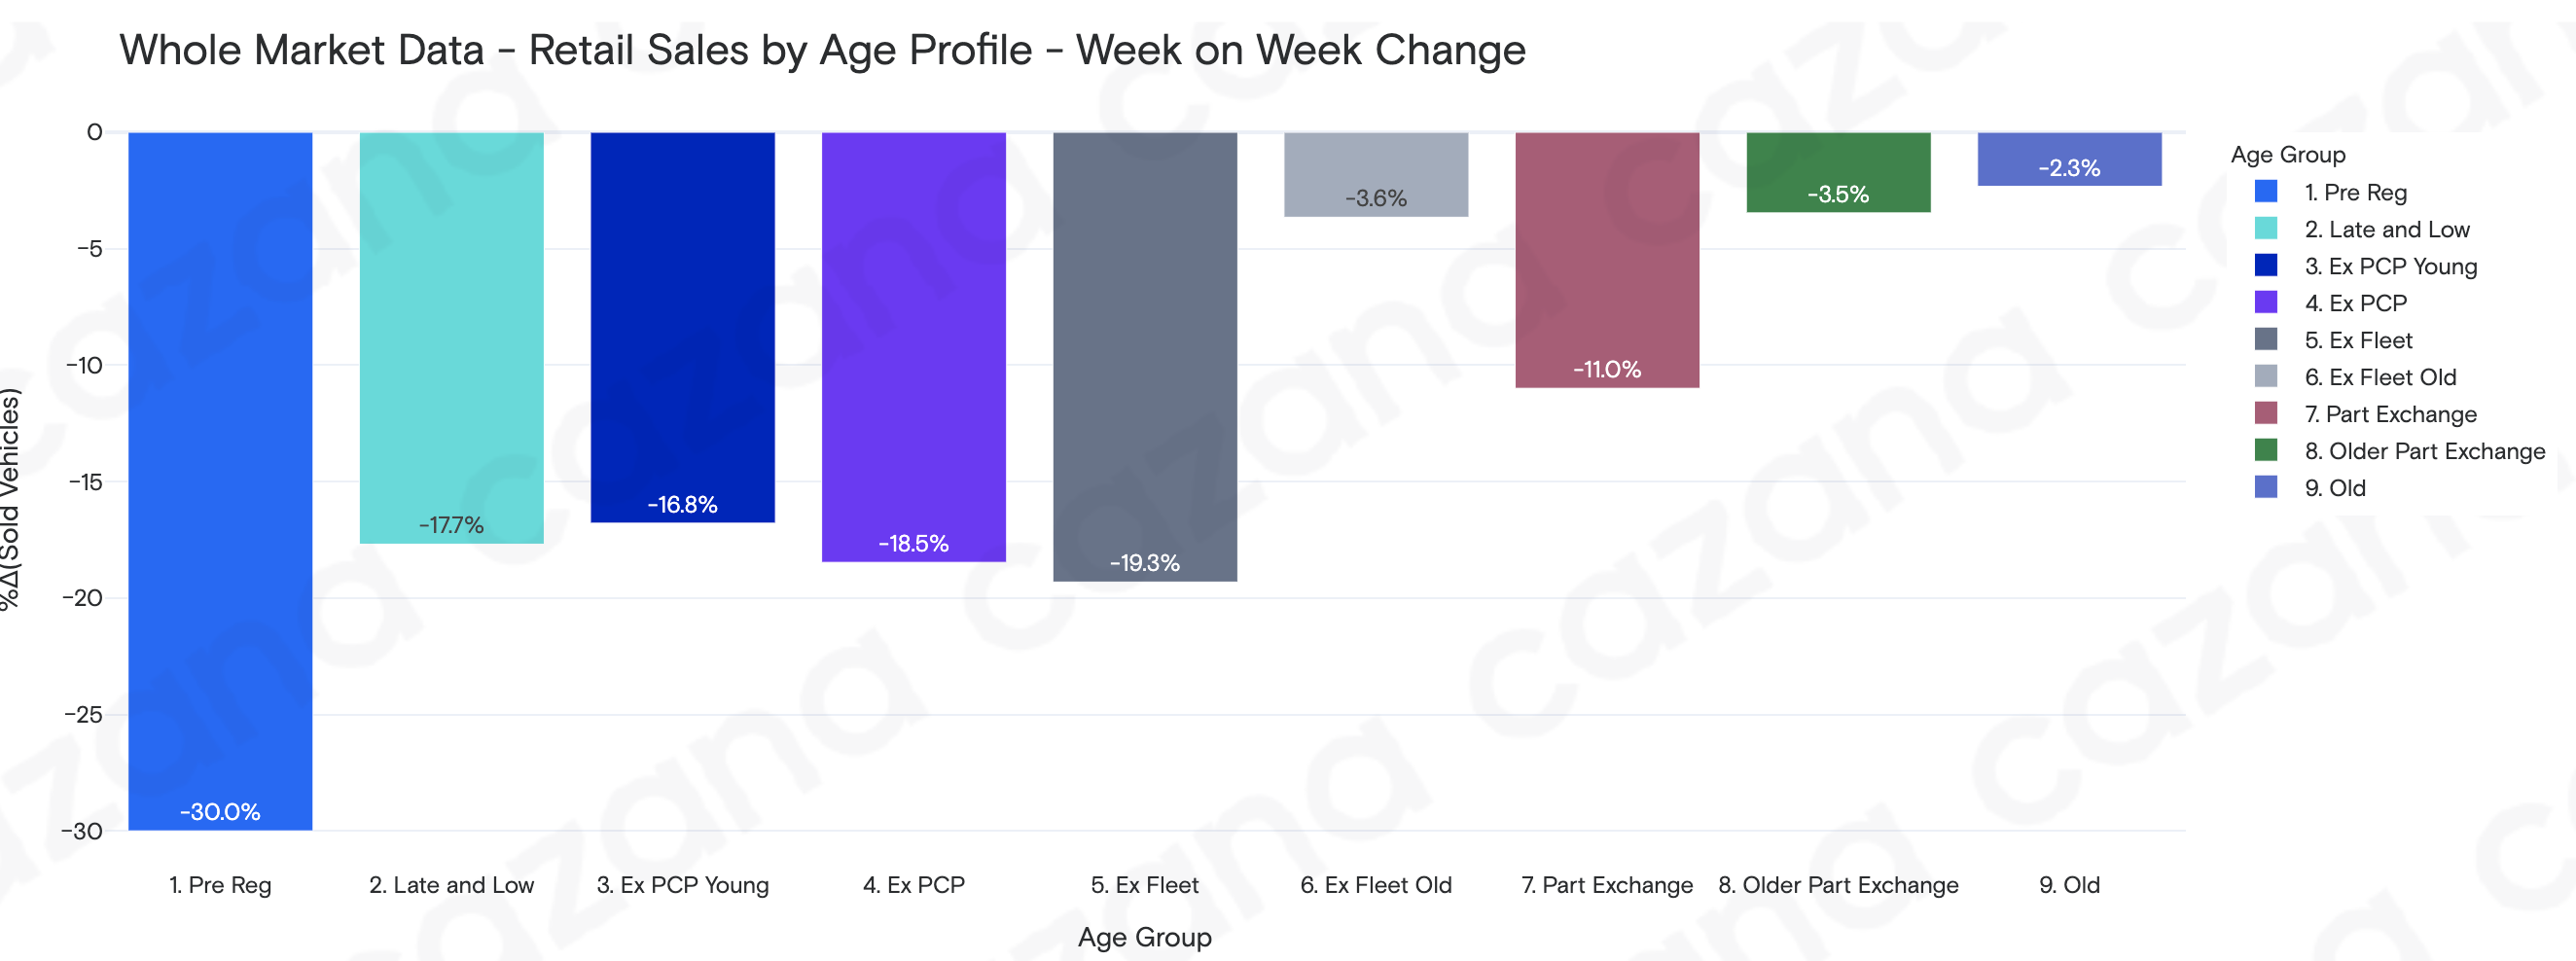 Weekly Pricing Insights - Retail sales by age profile - 13.07.21